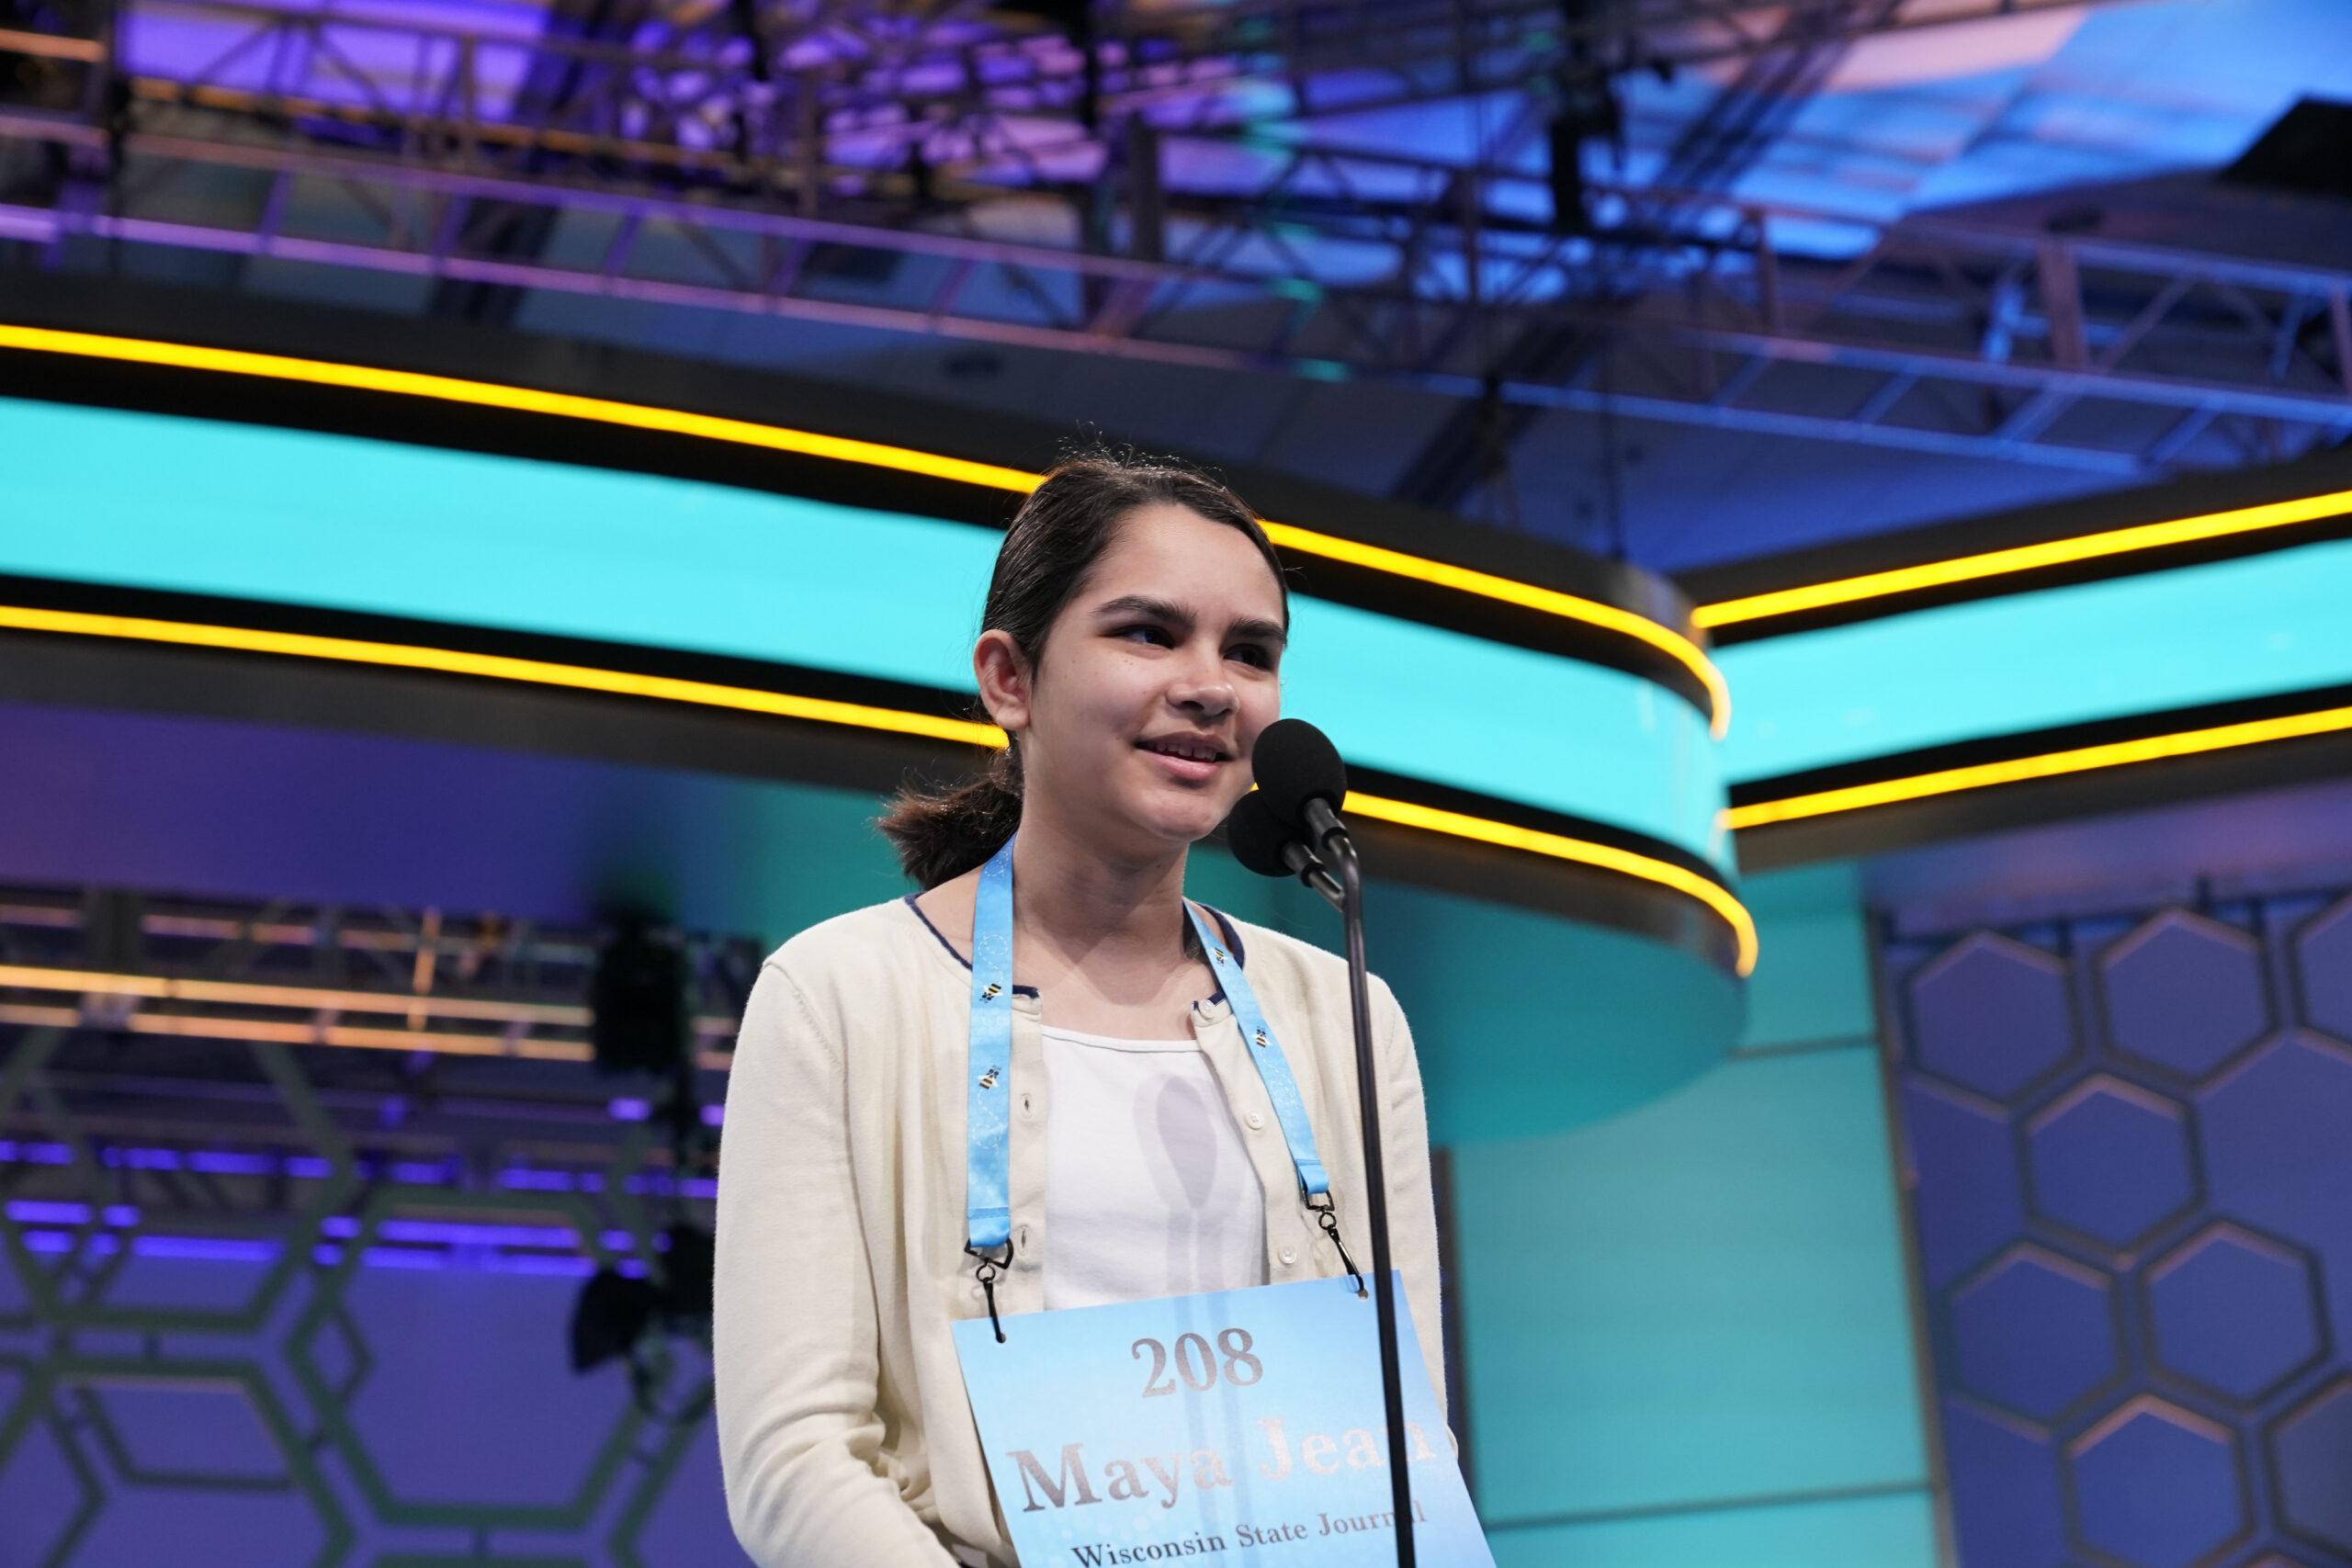 Maya Jadhav stands at a microphone on stage at the Scripps National Spelling Bee